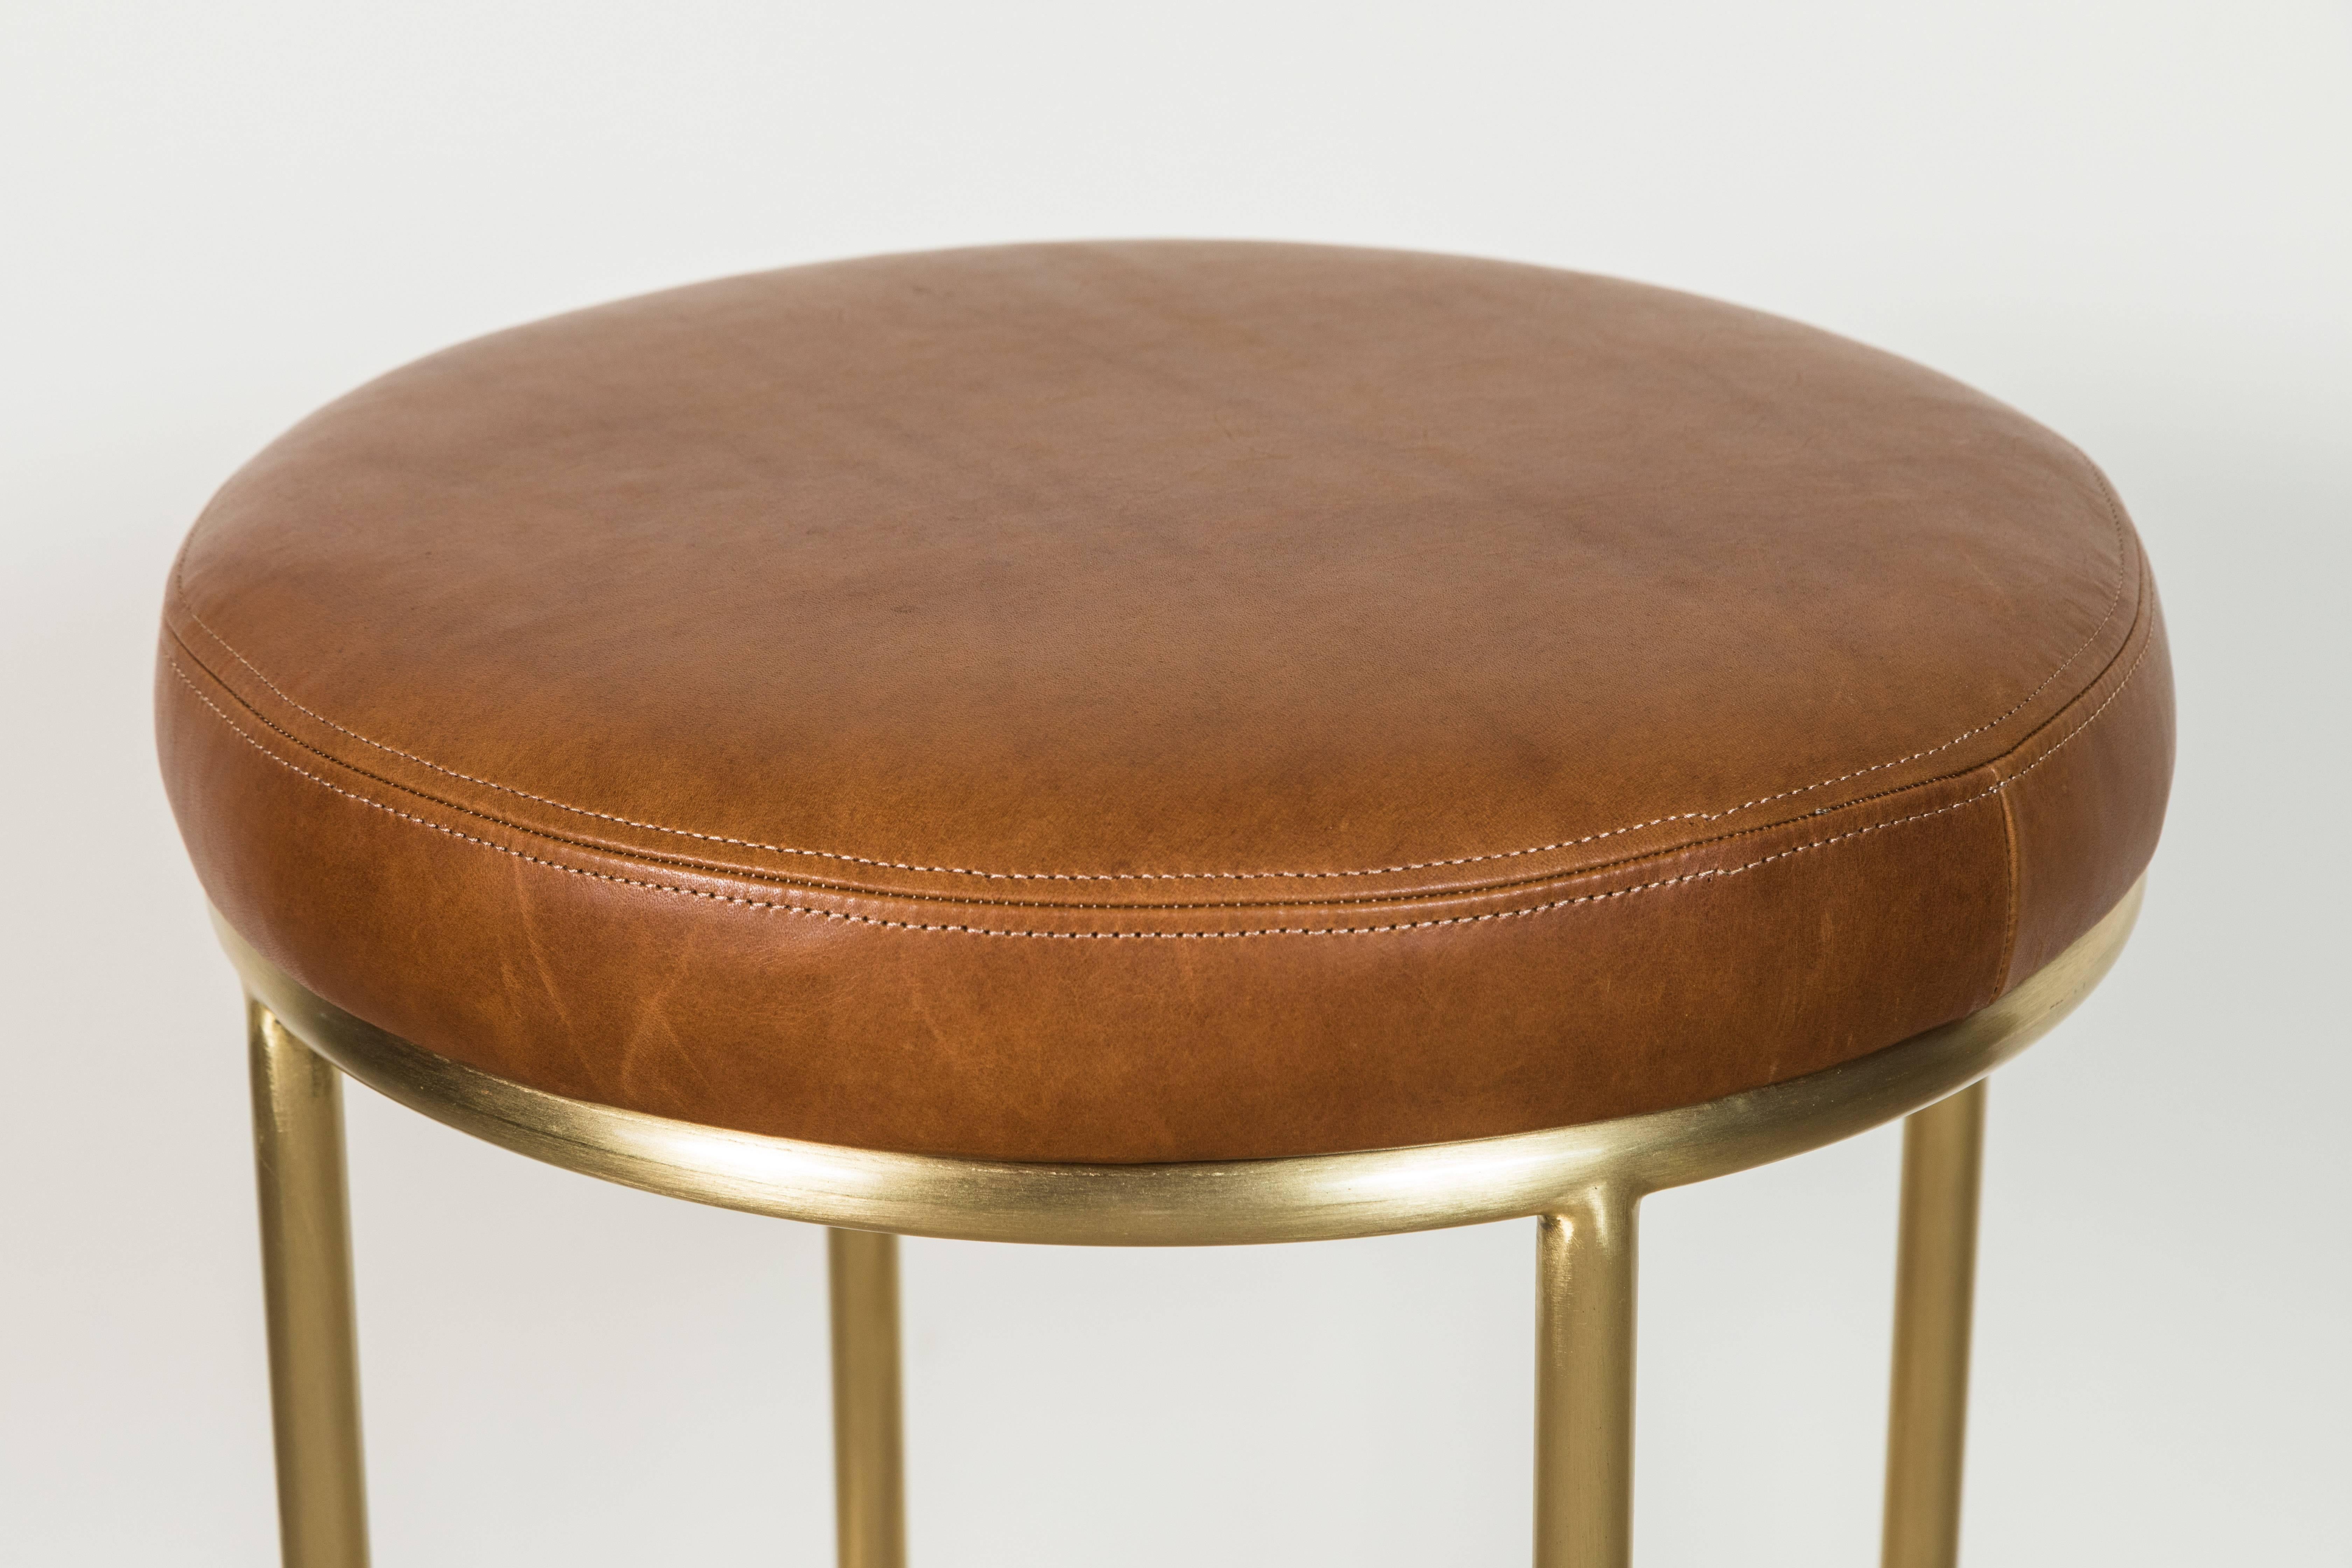 American Orsini Counterstool in Leather and Brass by Lawson-Fenning